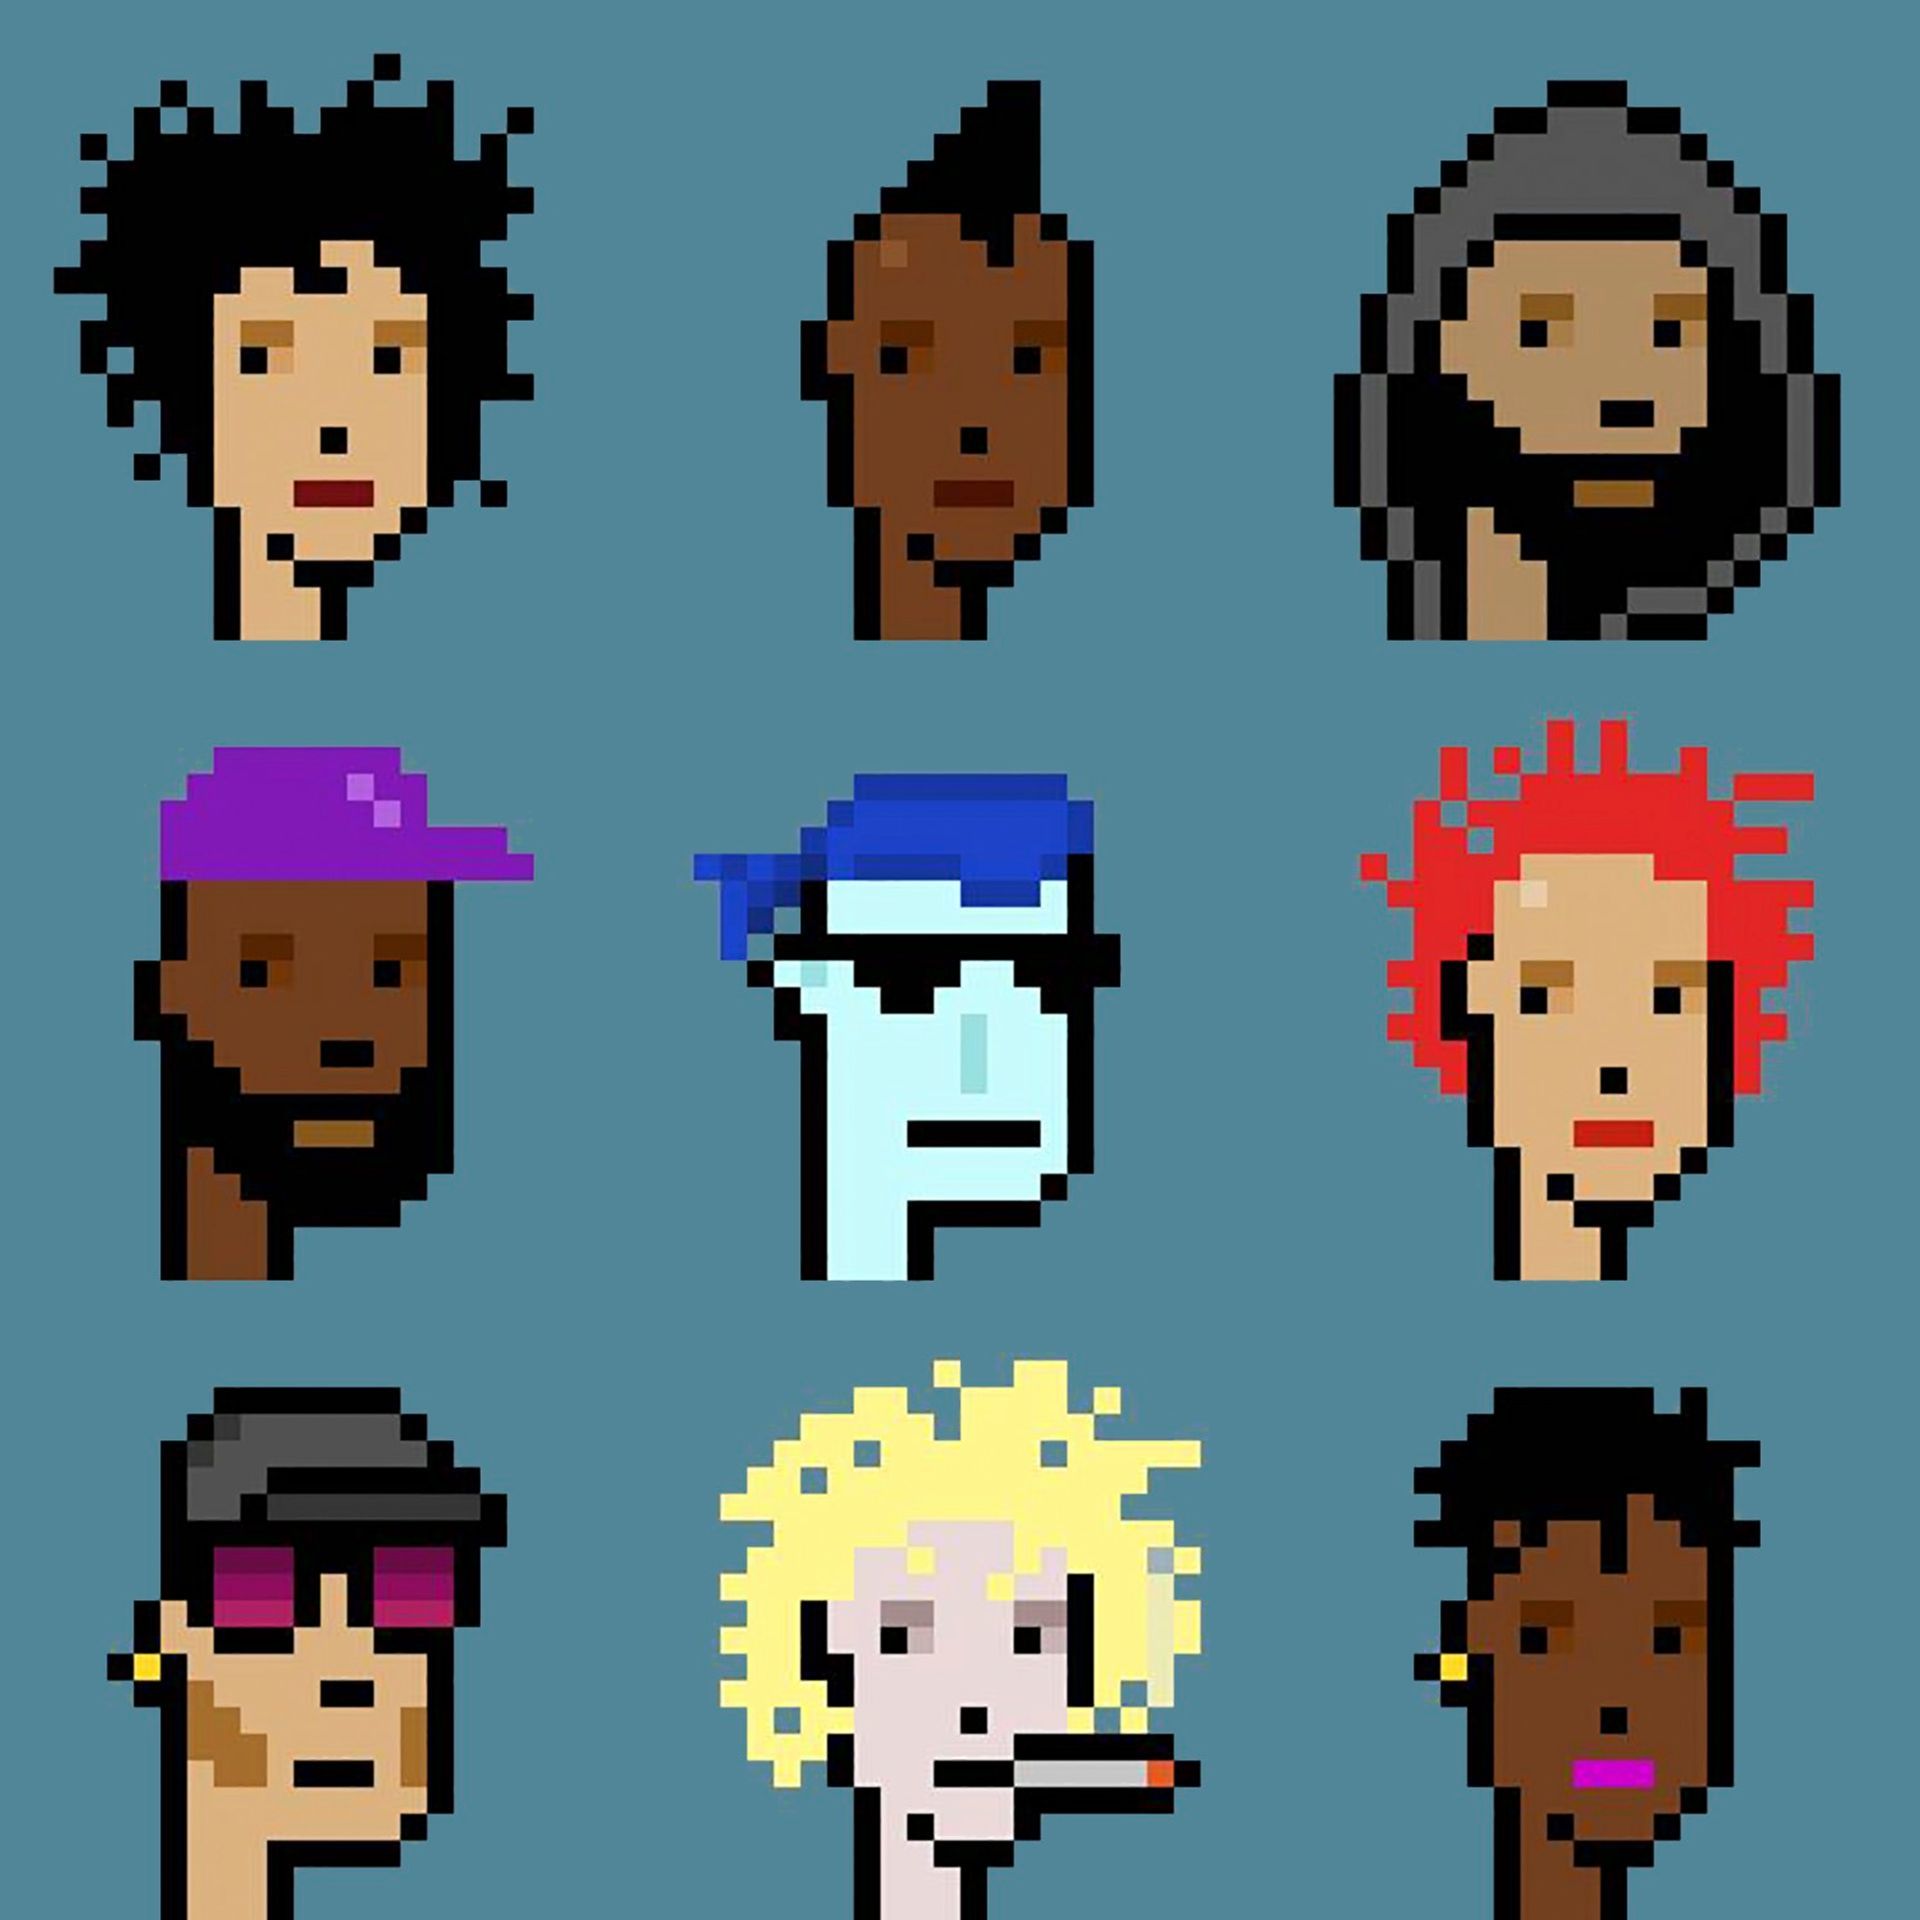 9 Cryptopunks (2, 532 , 58, 30, 635, 602, 768, 603 and 757) made in 2017. In June 2021 Sotheby's sold a single Cryptopunk NFT, #7523, for $11.8m Courtesy of Christie's